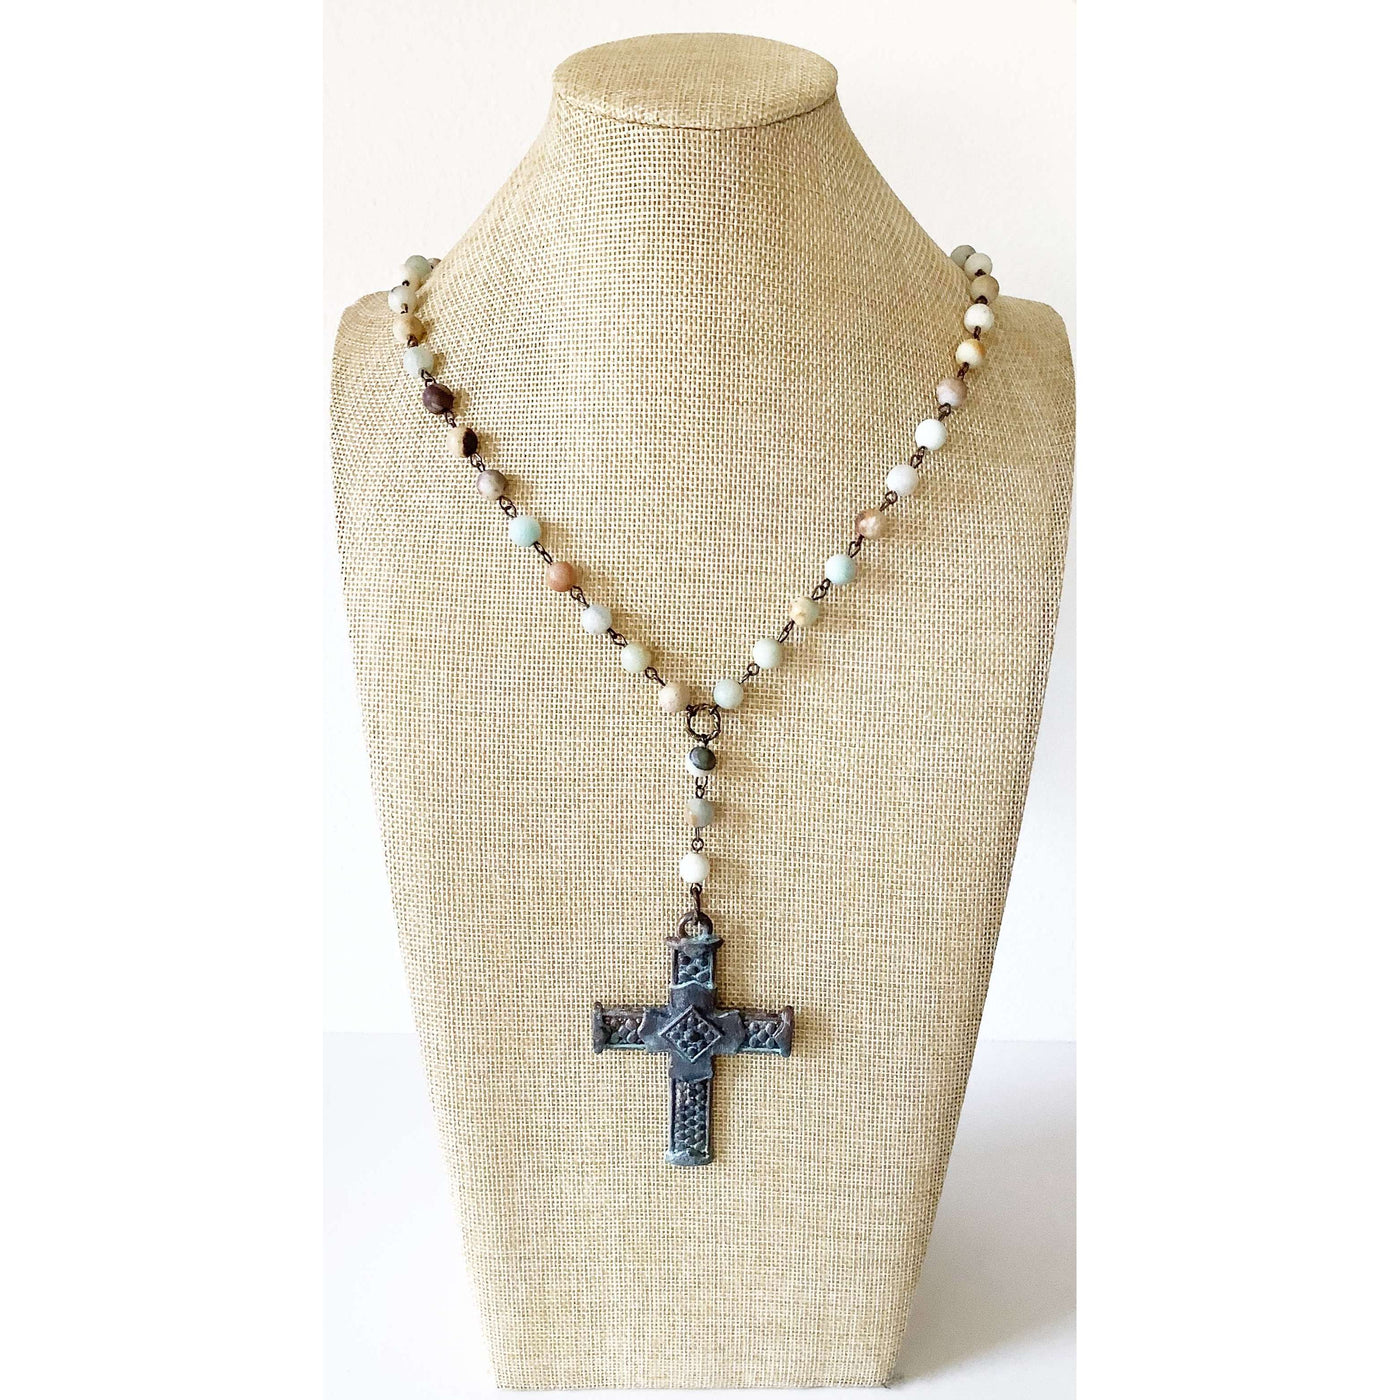 Rustic cross necklace with multicolored stones - Little Prairie Girl